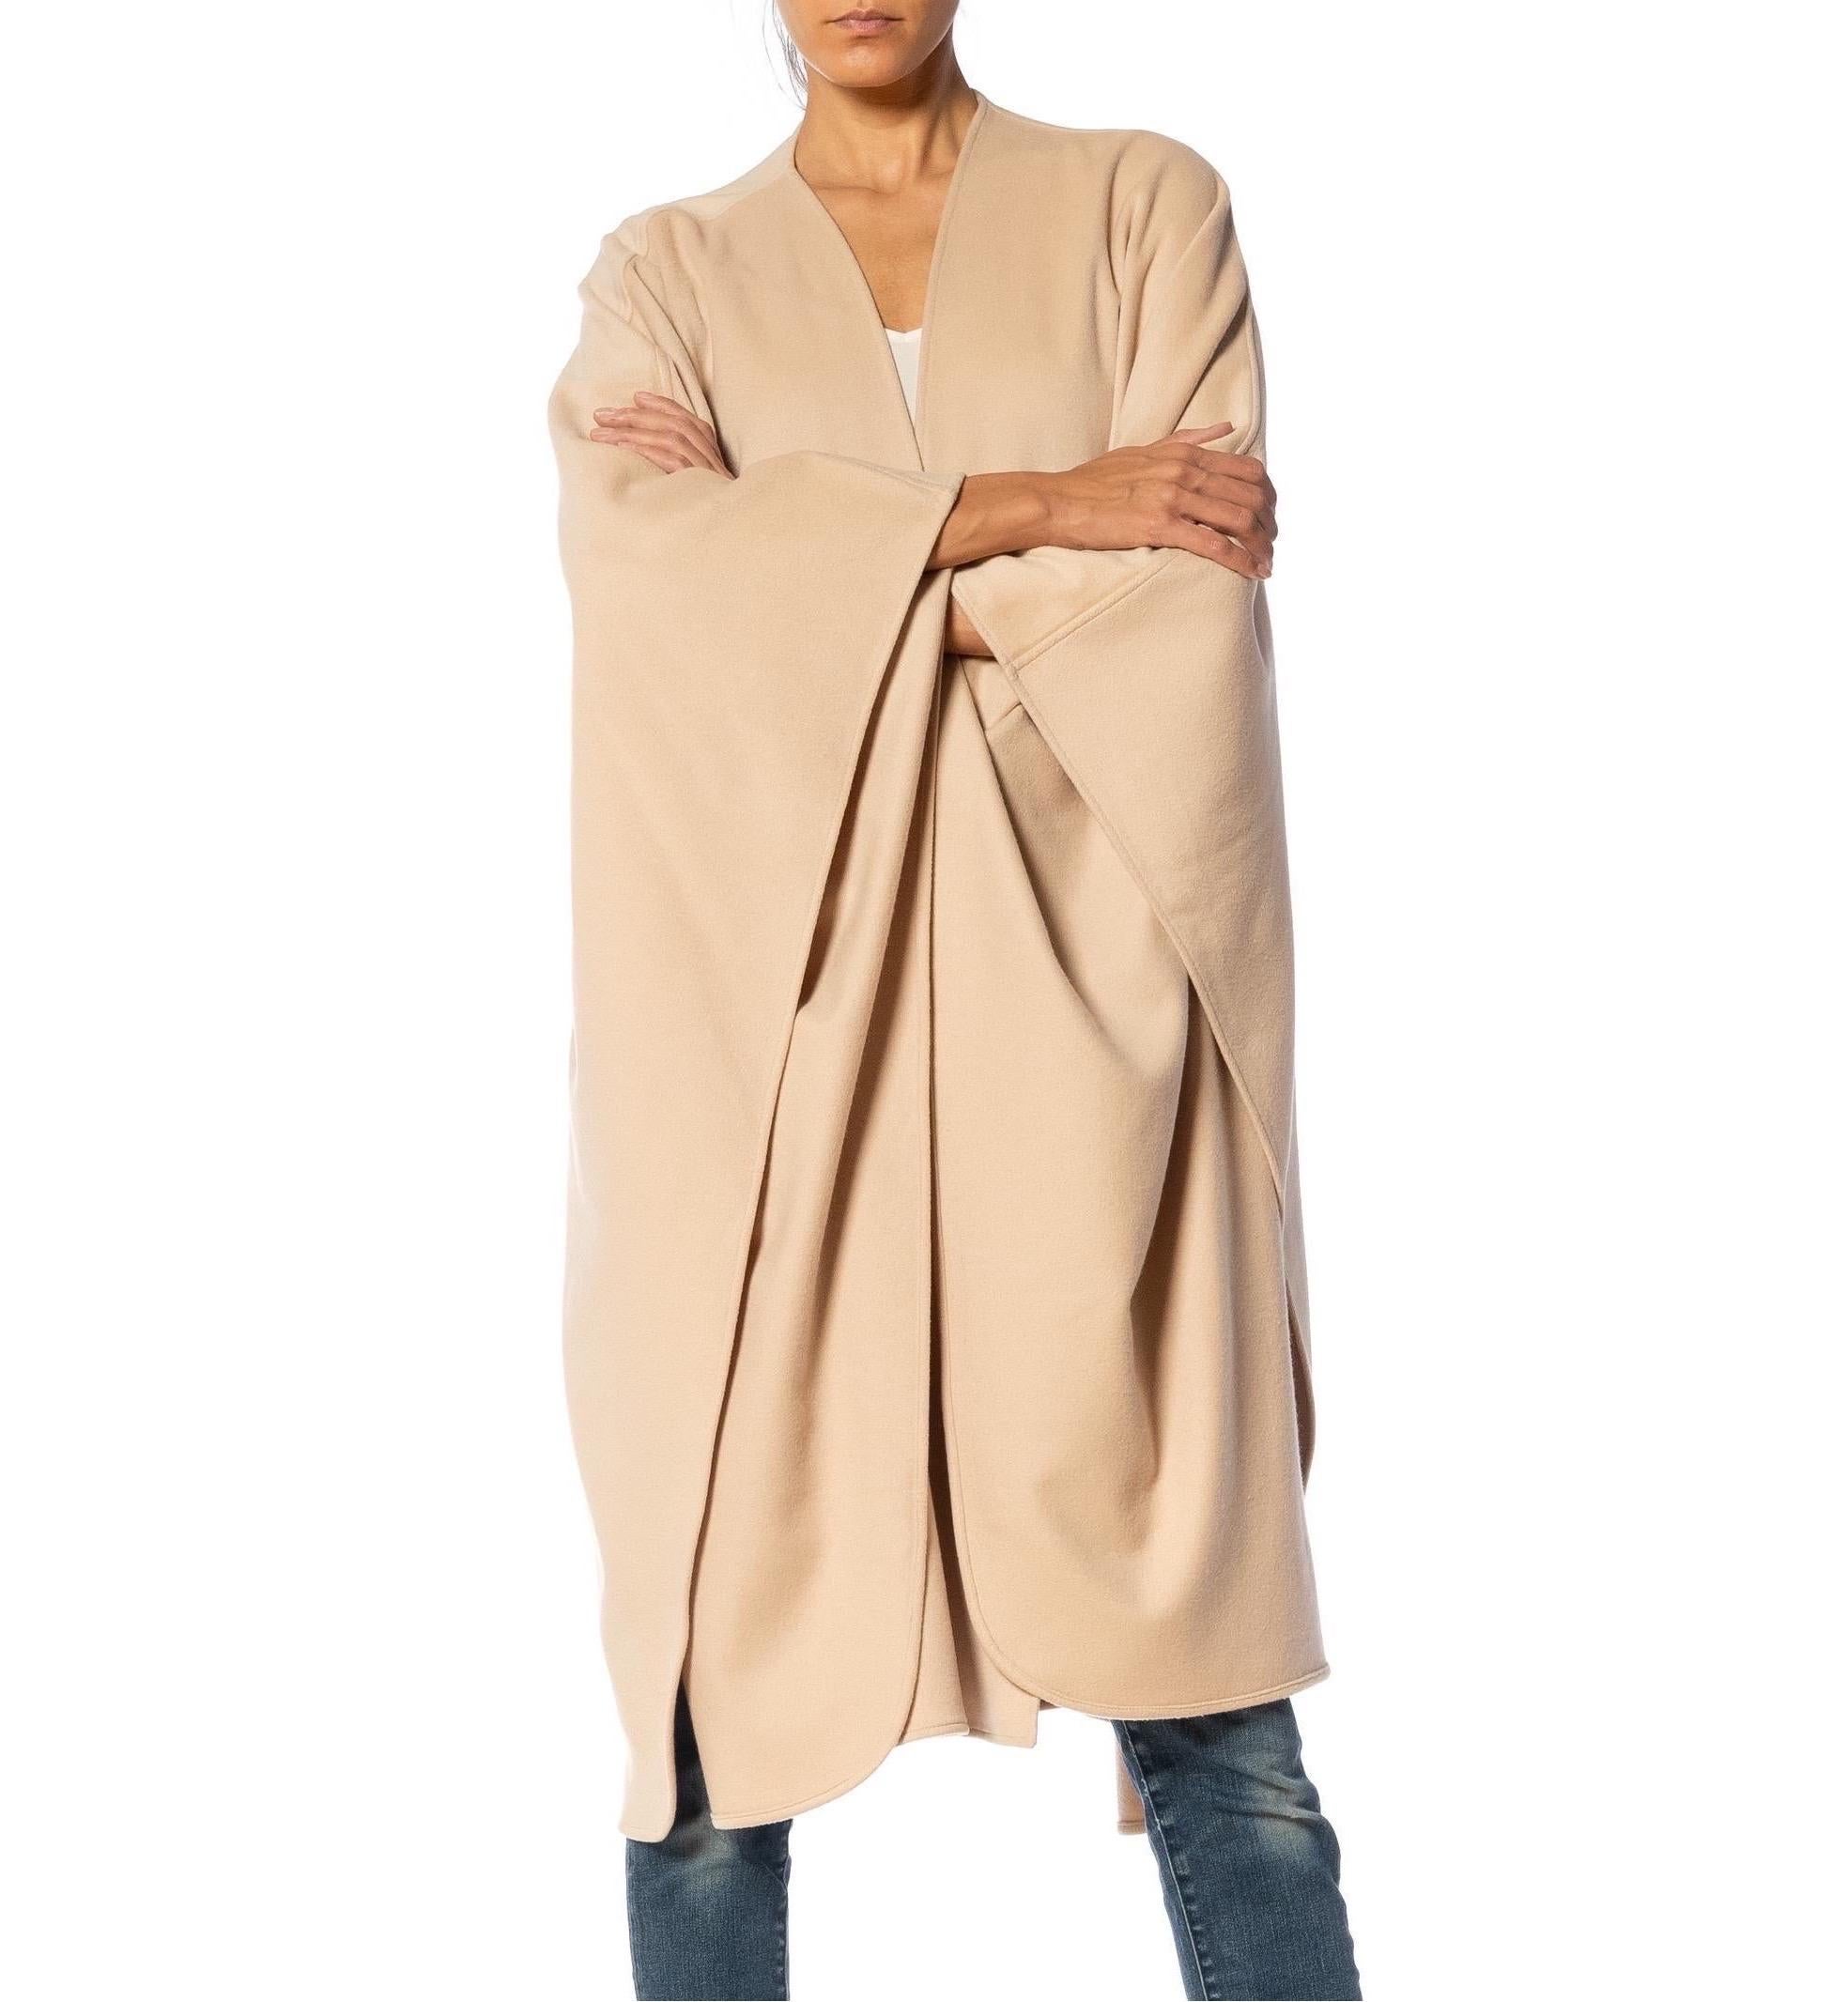 2000S GENNY Beige Cashmere Shawl For Sale 5